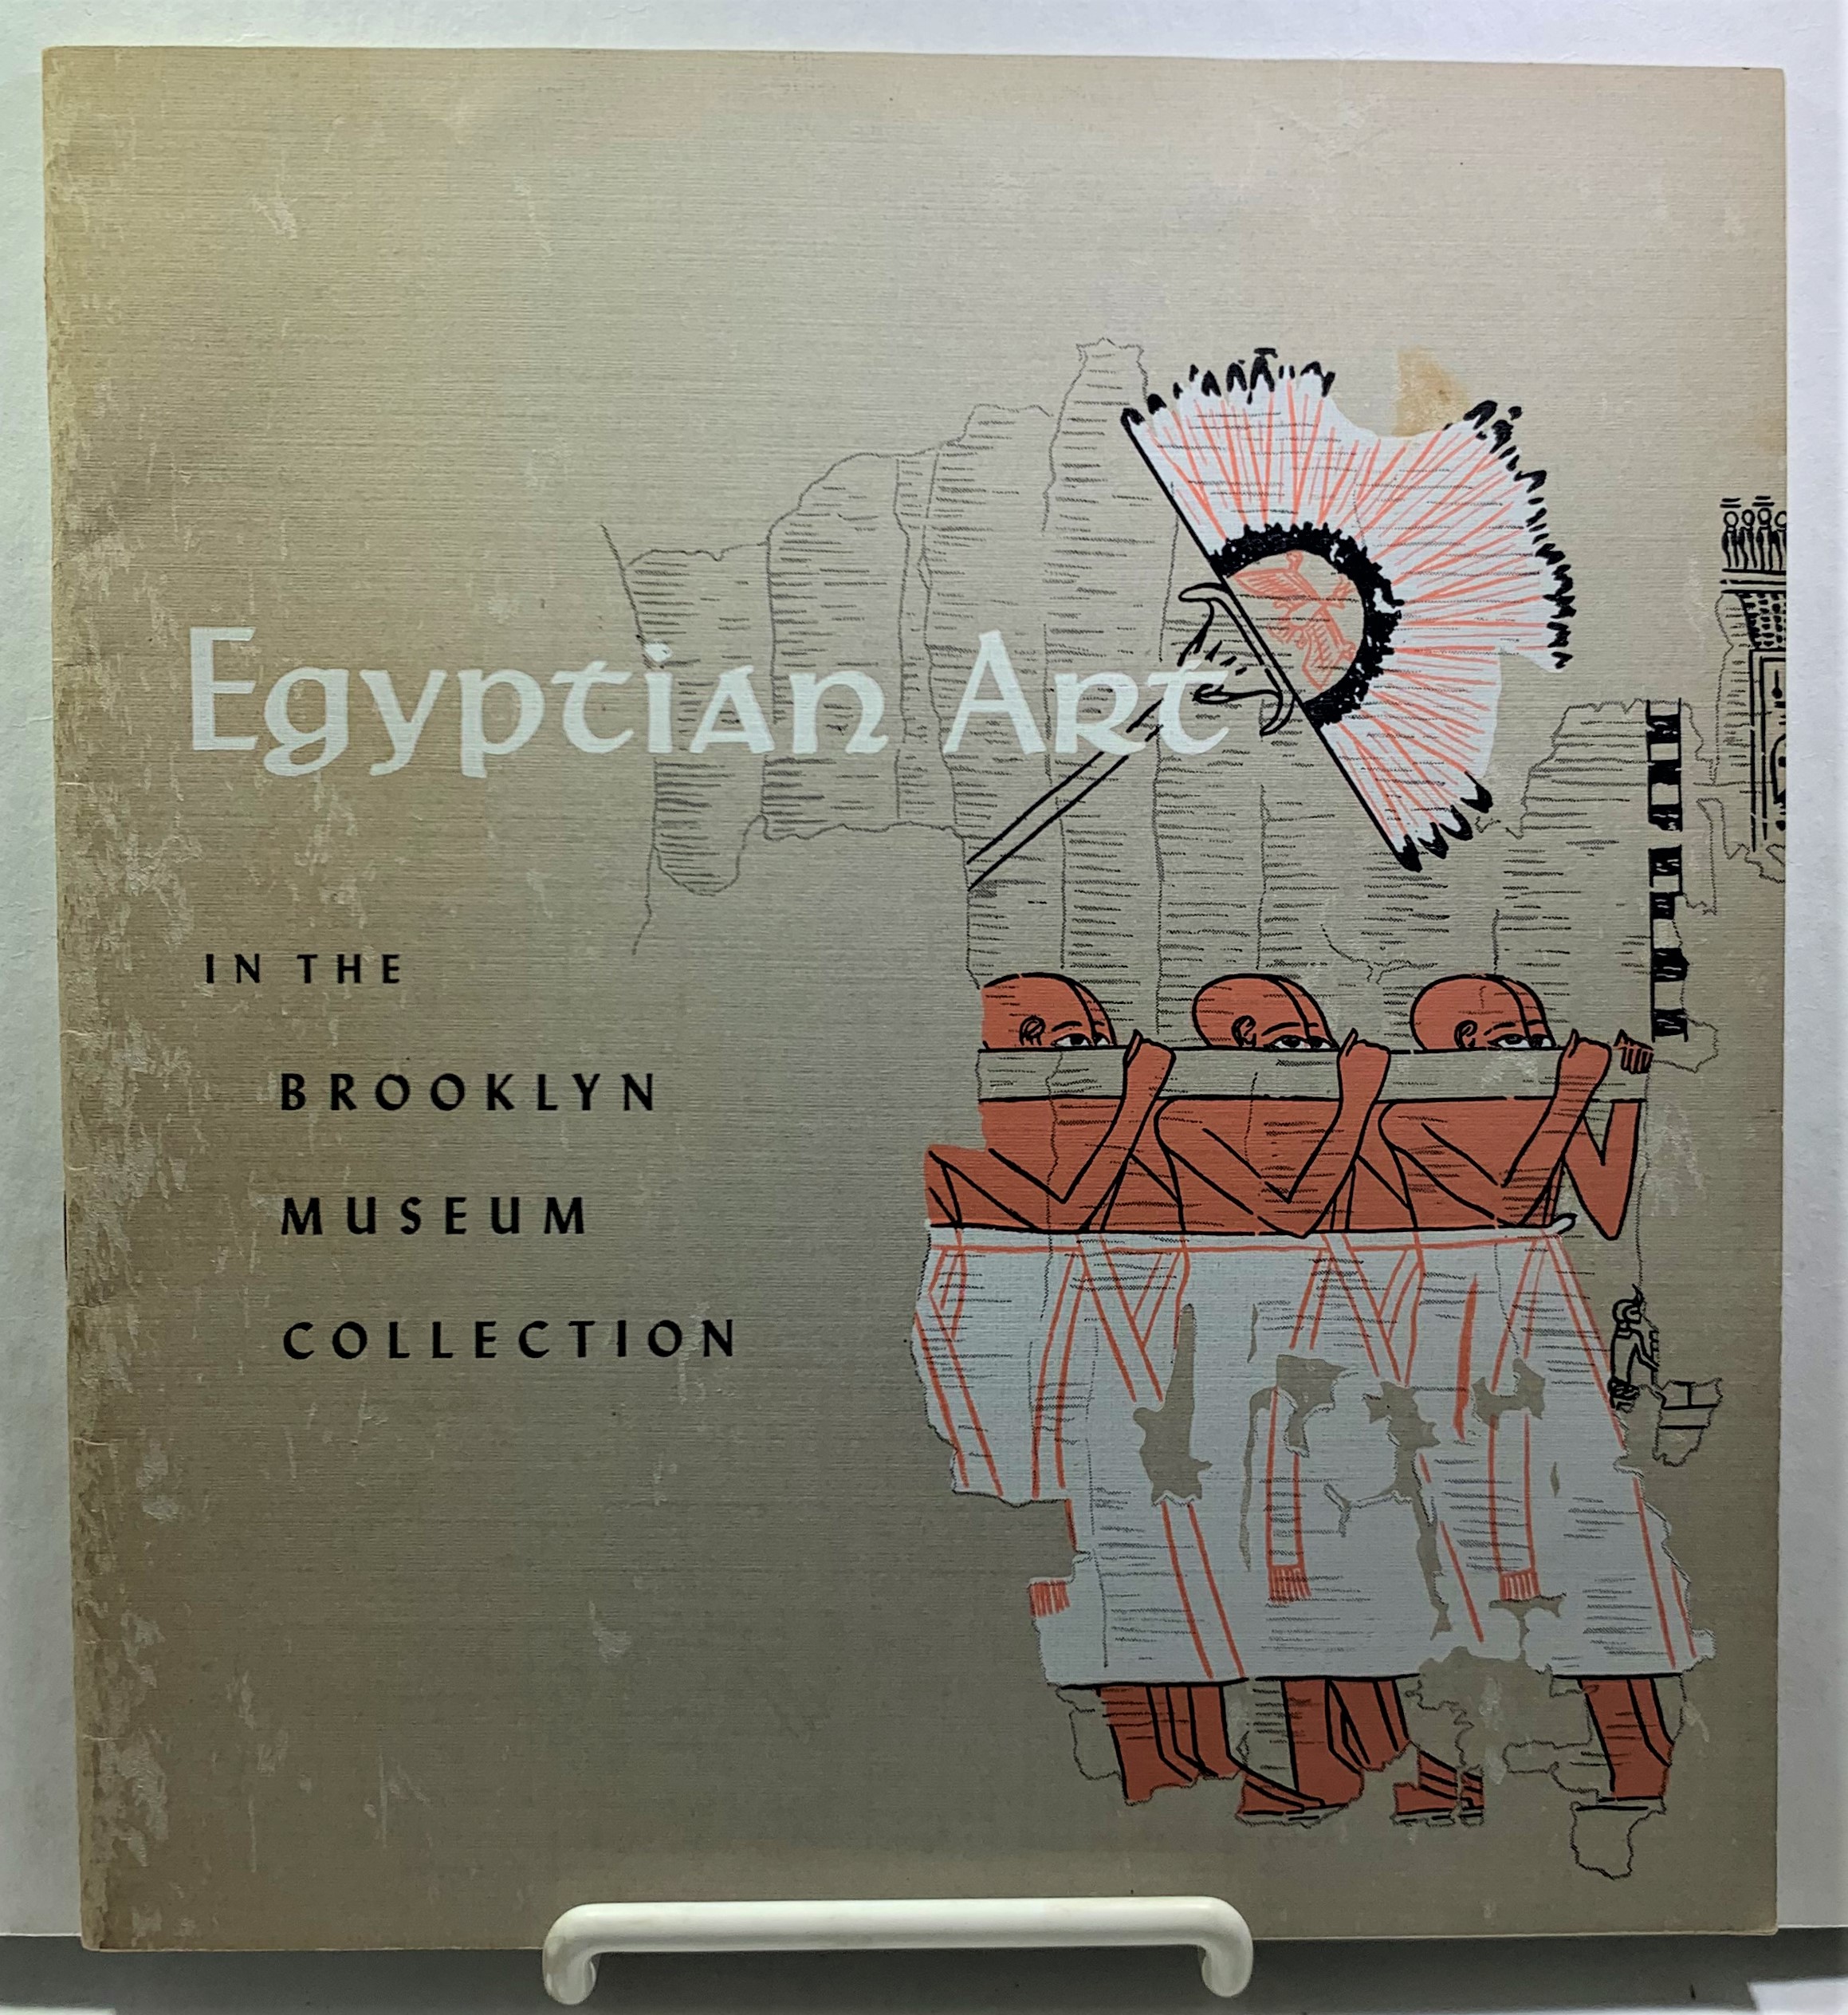 Image for Egyptian Art In The Brooklyn Museum Collection